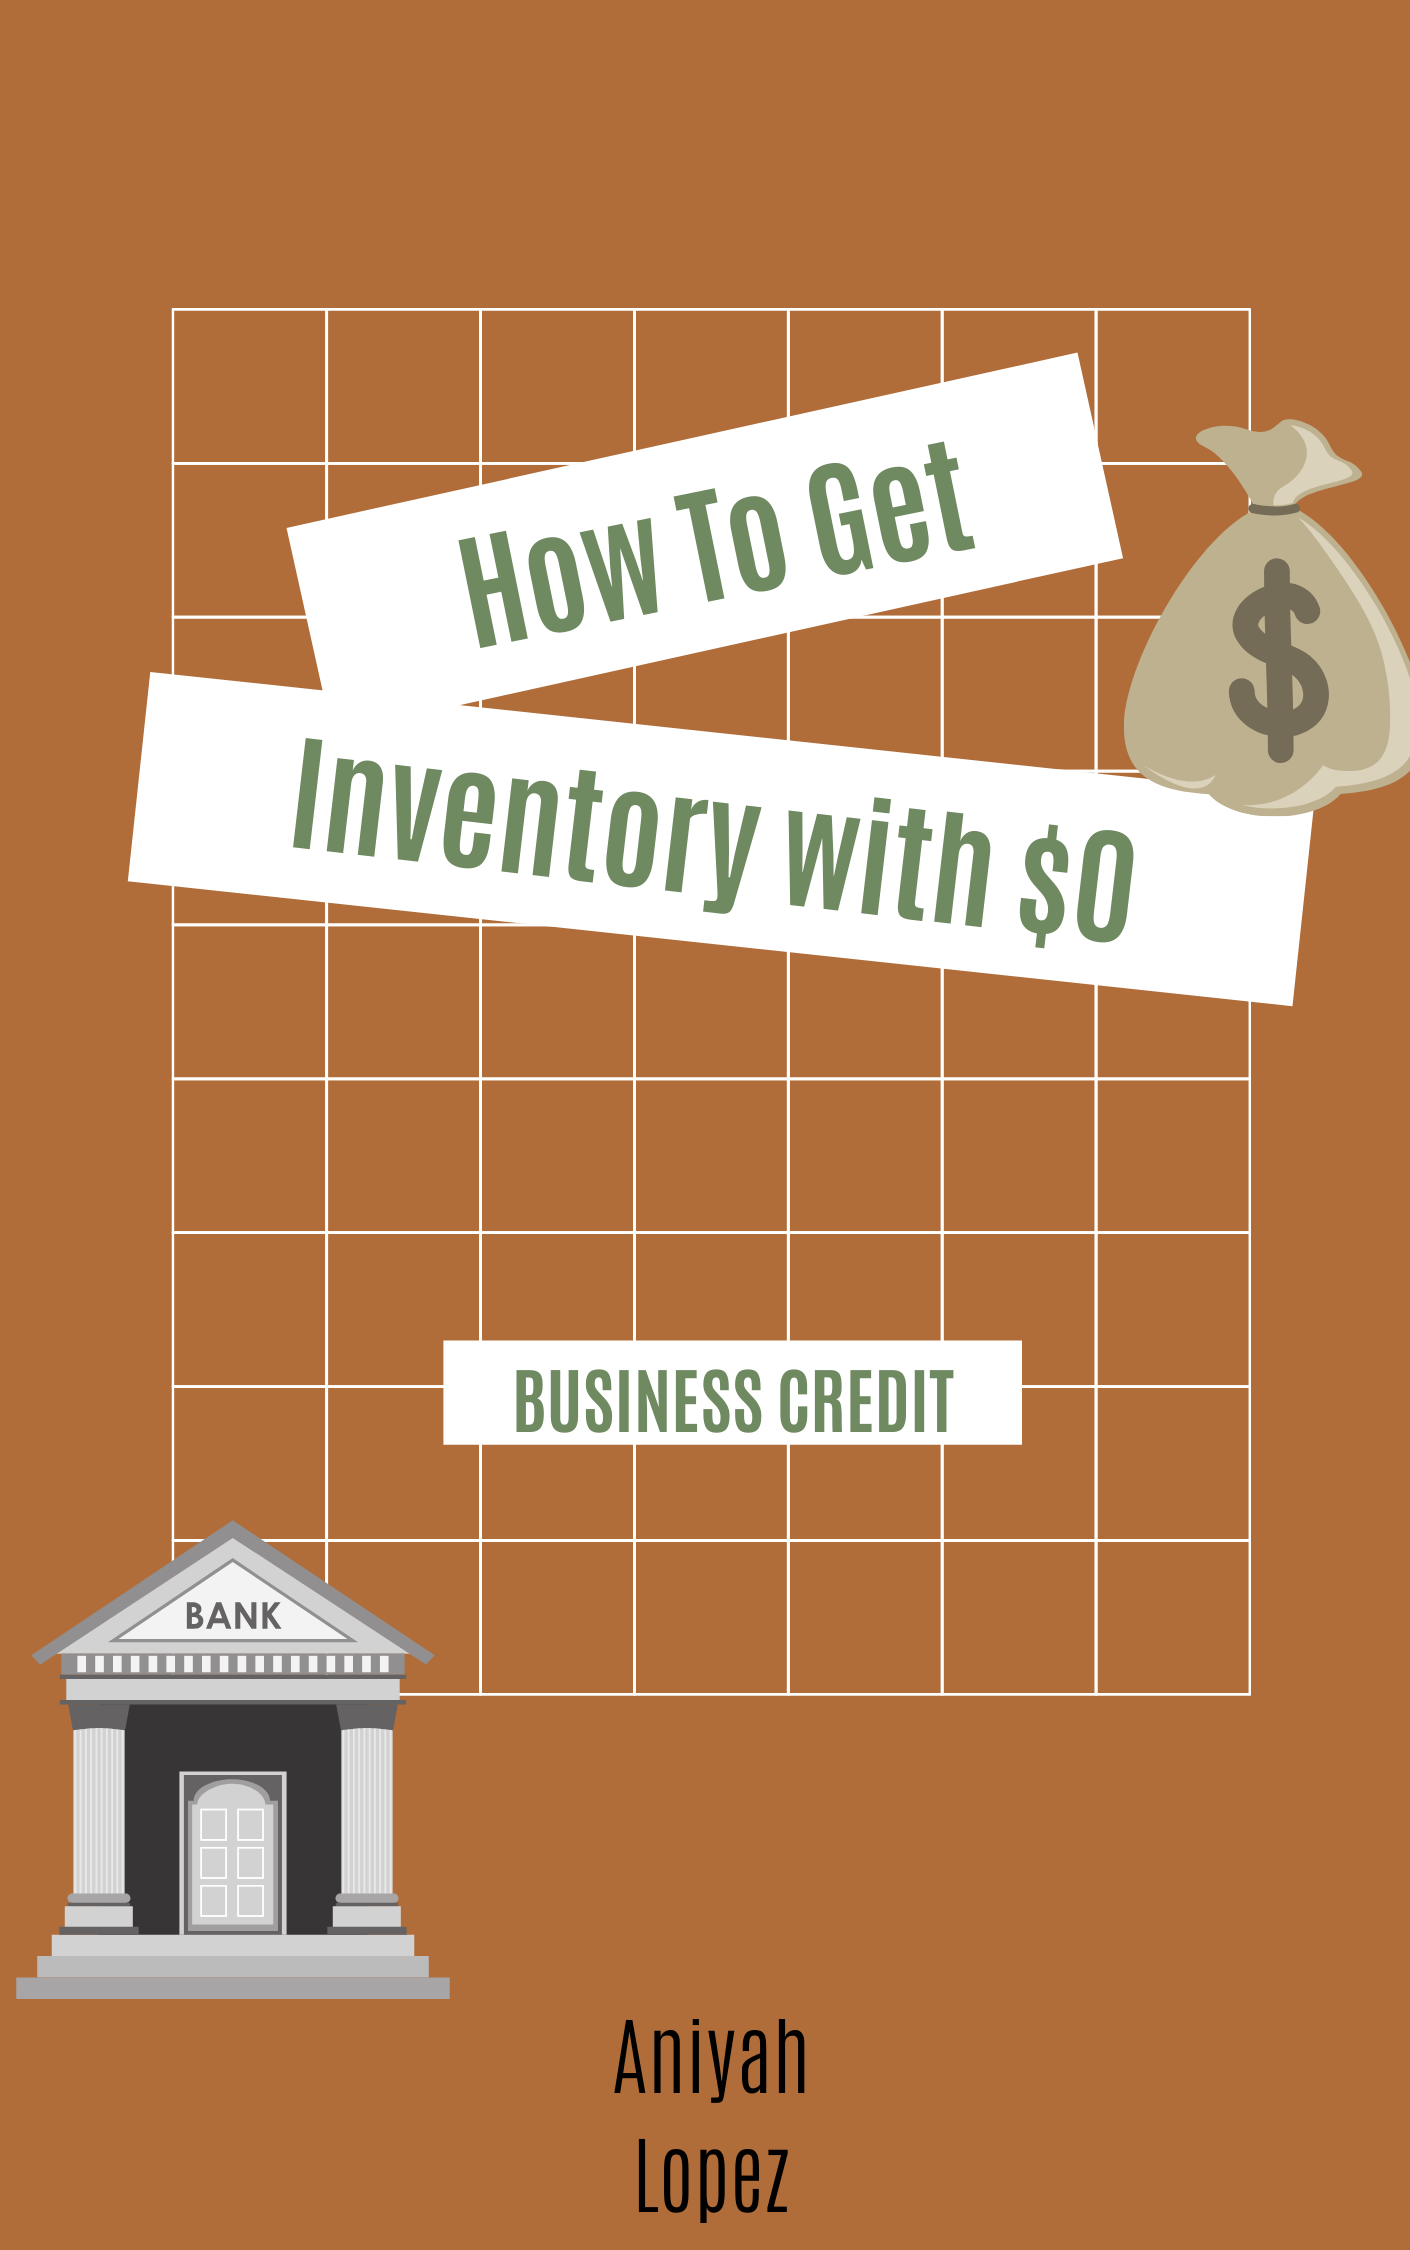 How to Get inventory with $0